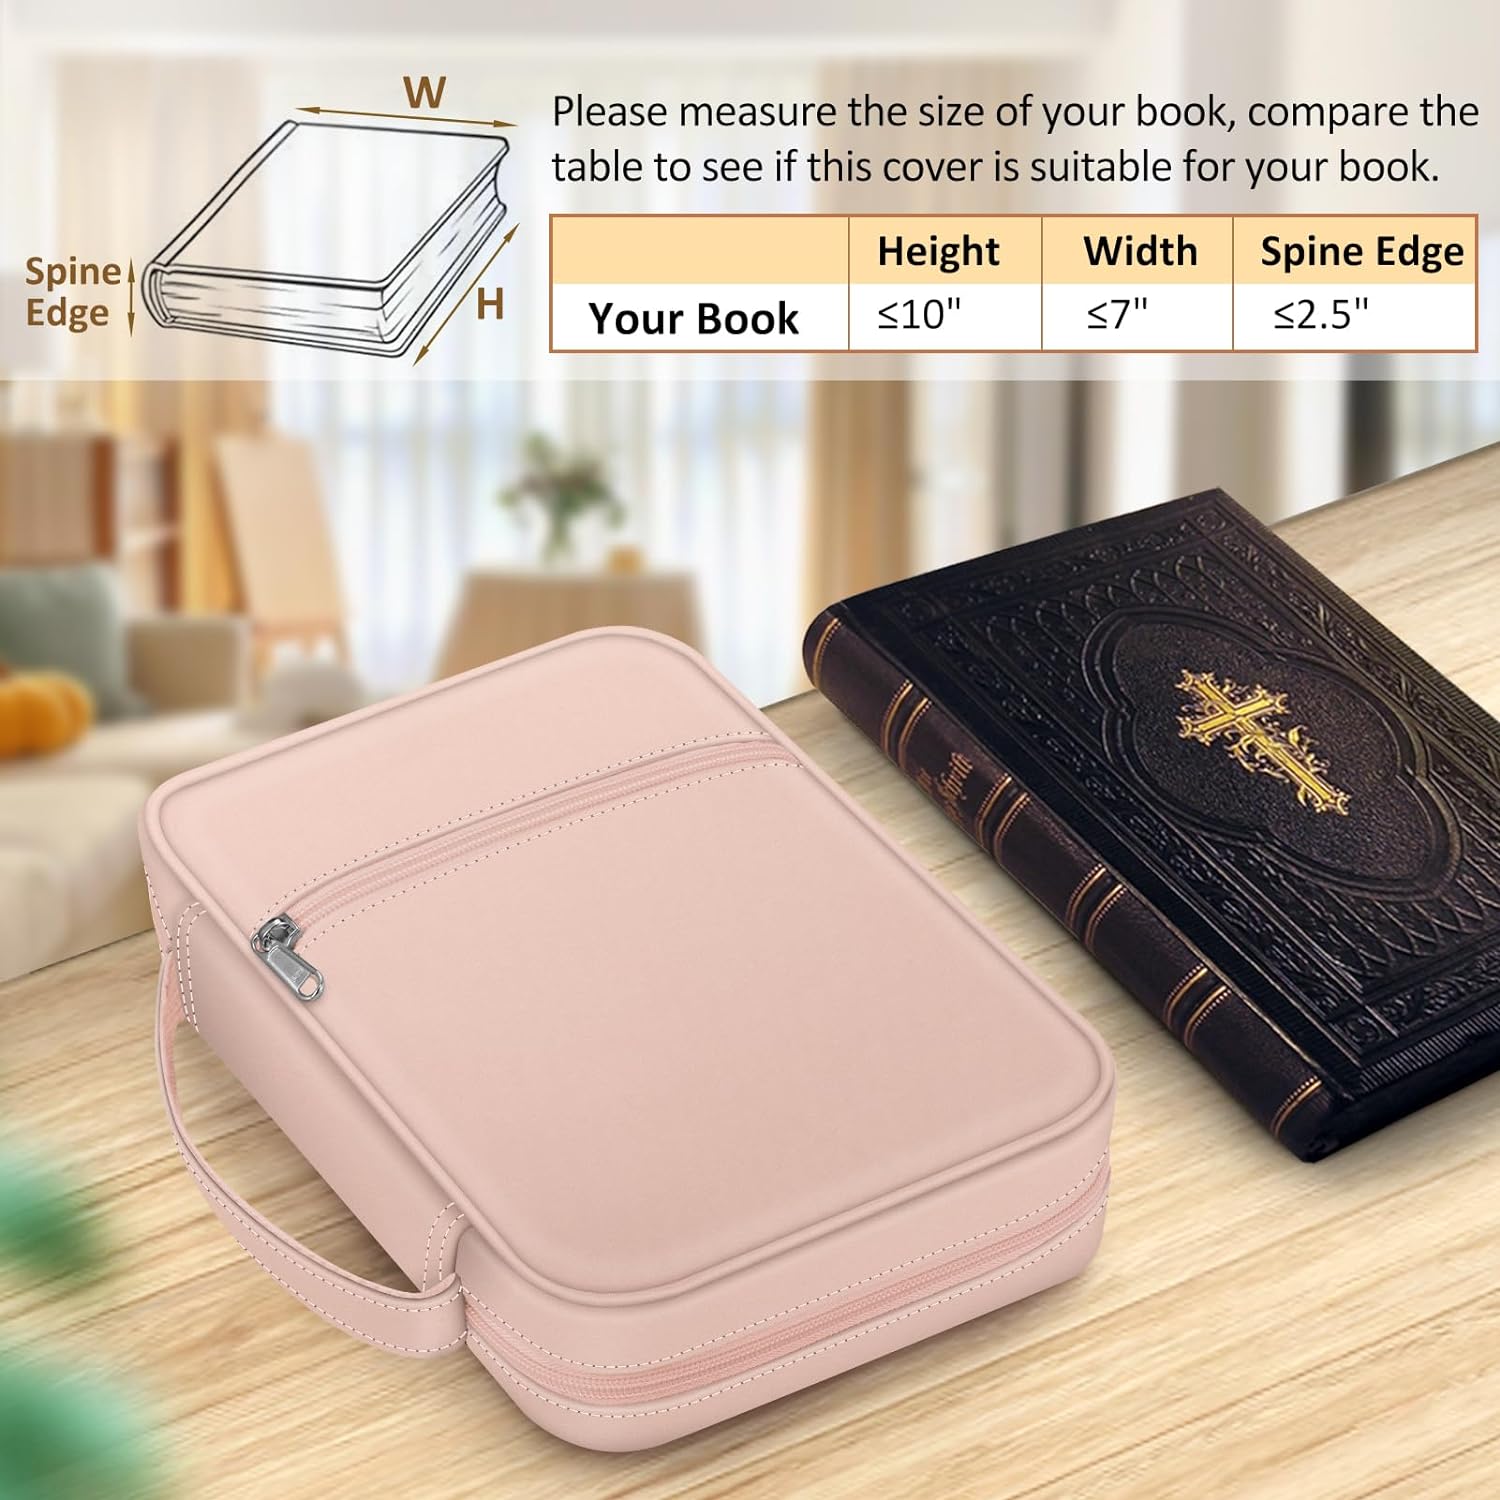 Bible Cover Case,Small Size Church Study Book Carrying Bag